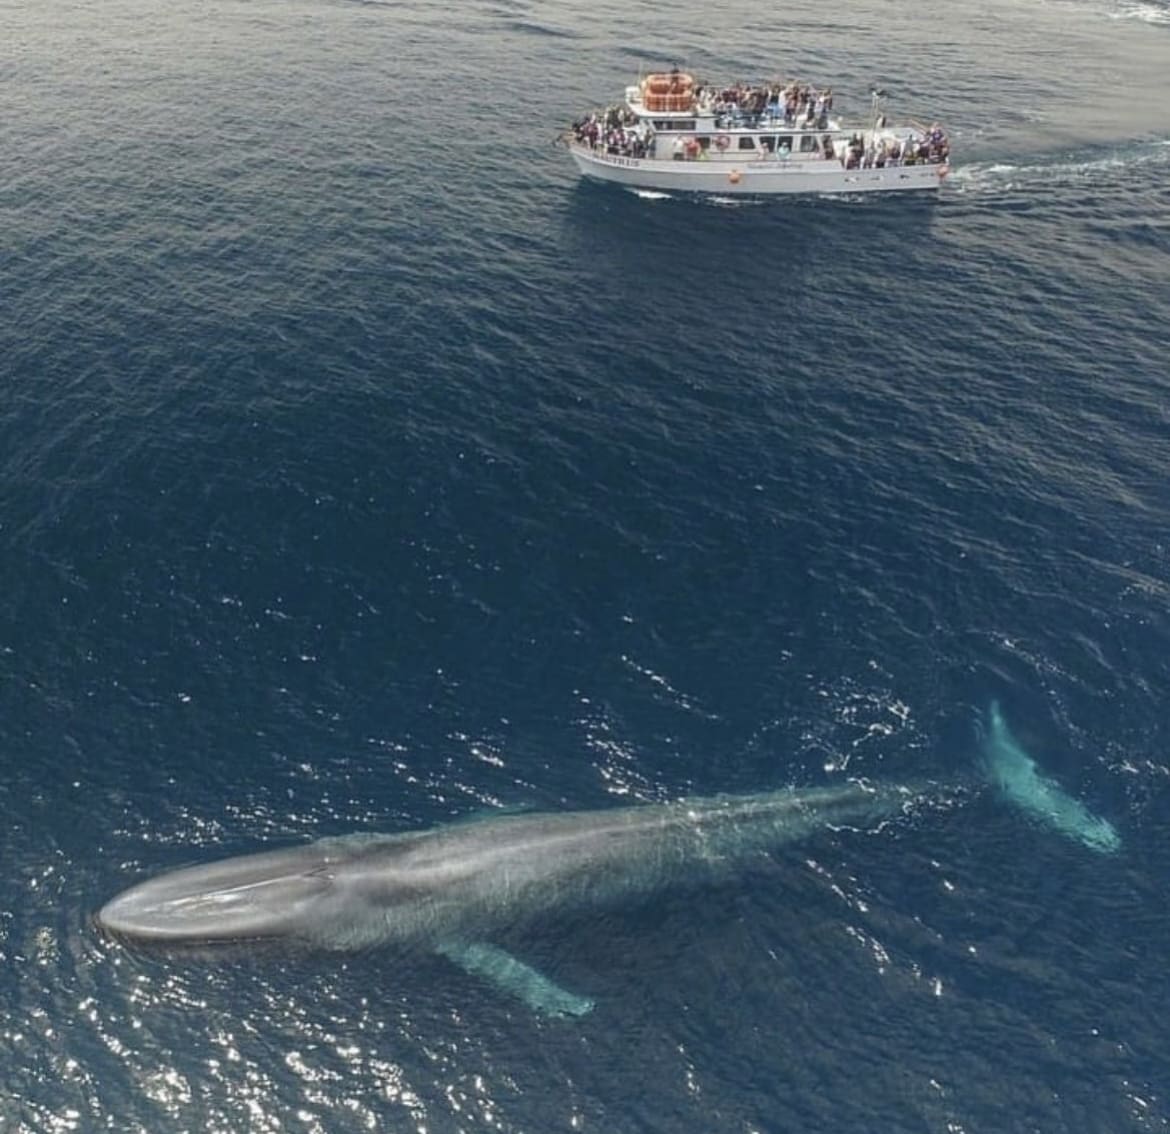 A blue whale showing off its size next to a large boat